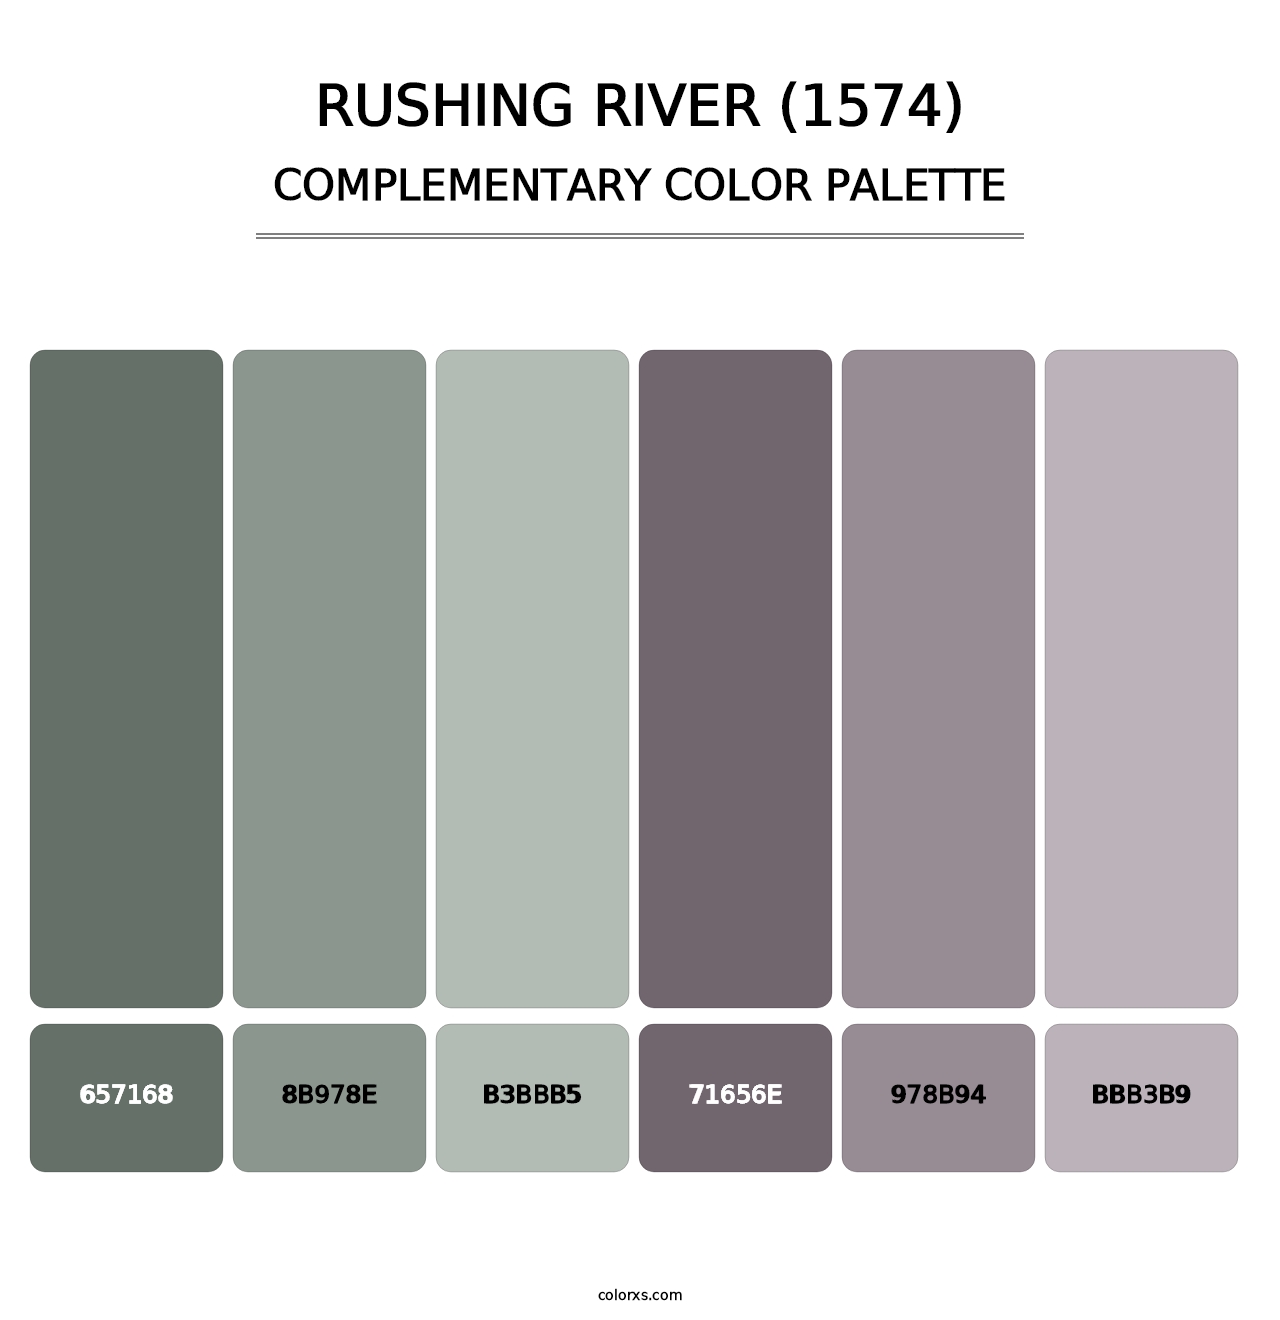 Rushing River (1574) - Complementary Color Palette